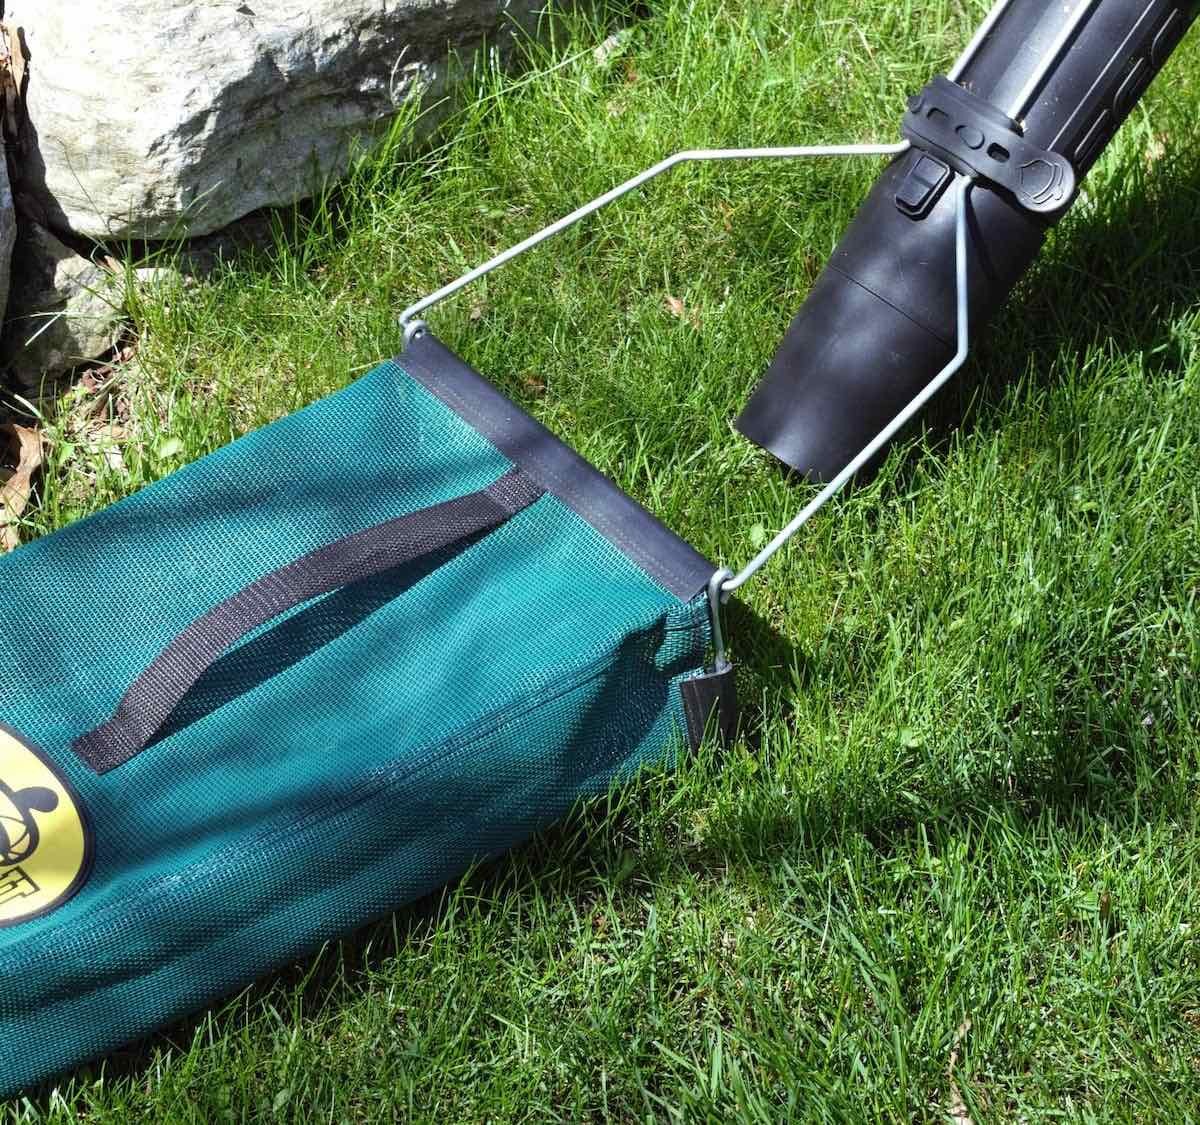 Lawnch-It Leaf Blower Attachment lets you easily collect debris as you work